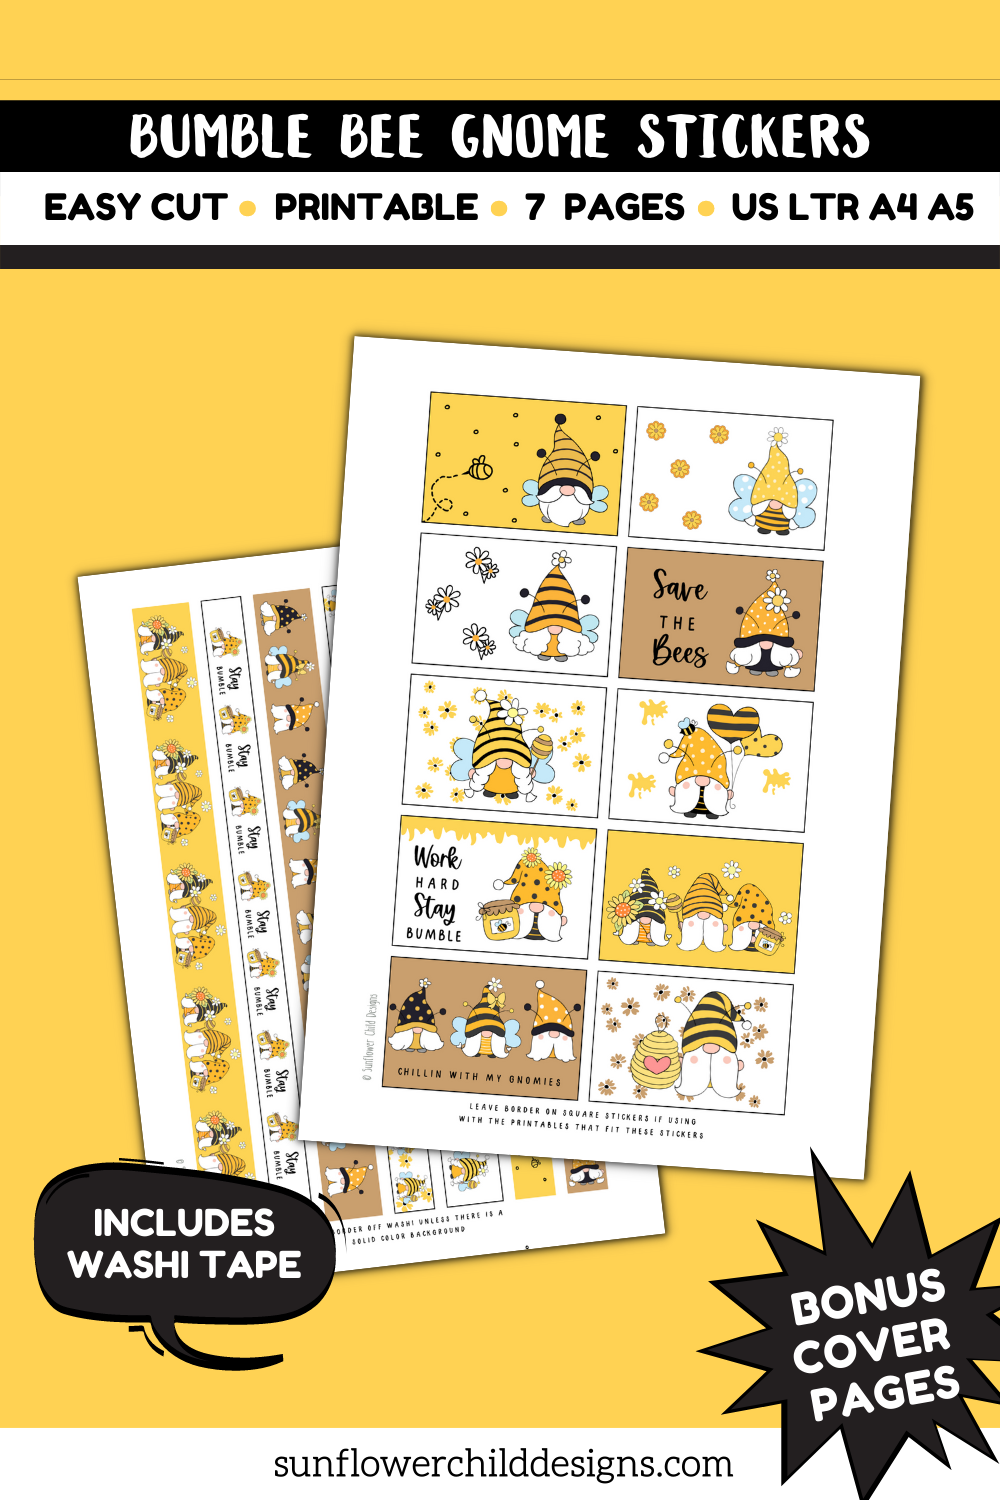 https://images.squarespace-cdn.com/content/v1/5e20e07a4be93e7c47a328f2/1660414677718-ECPALWA498FYPMOWR1UA/bumble-bee-gnome-stickers-printable-stickers-1.png?format=1000w